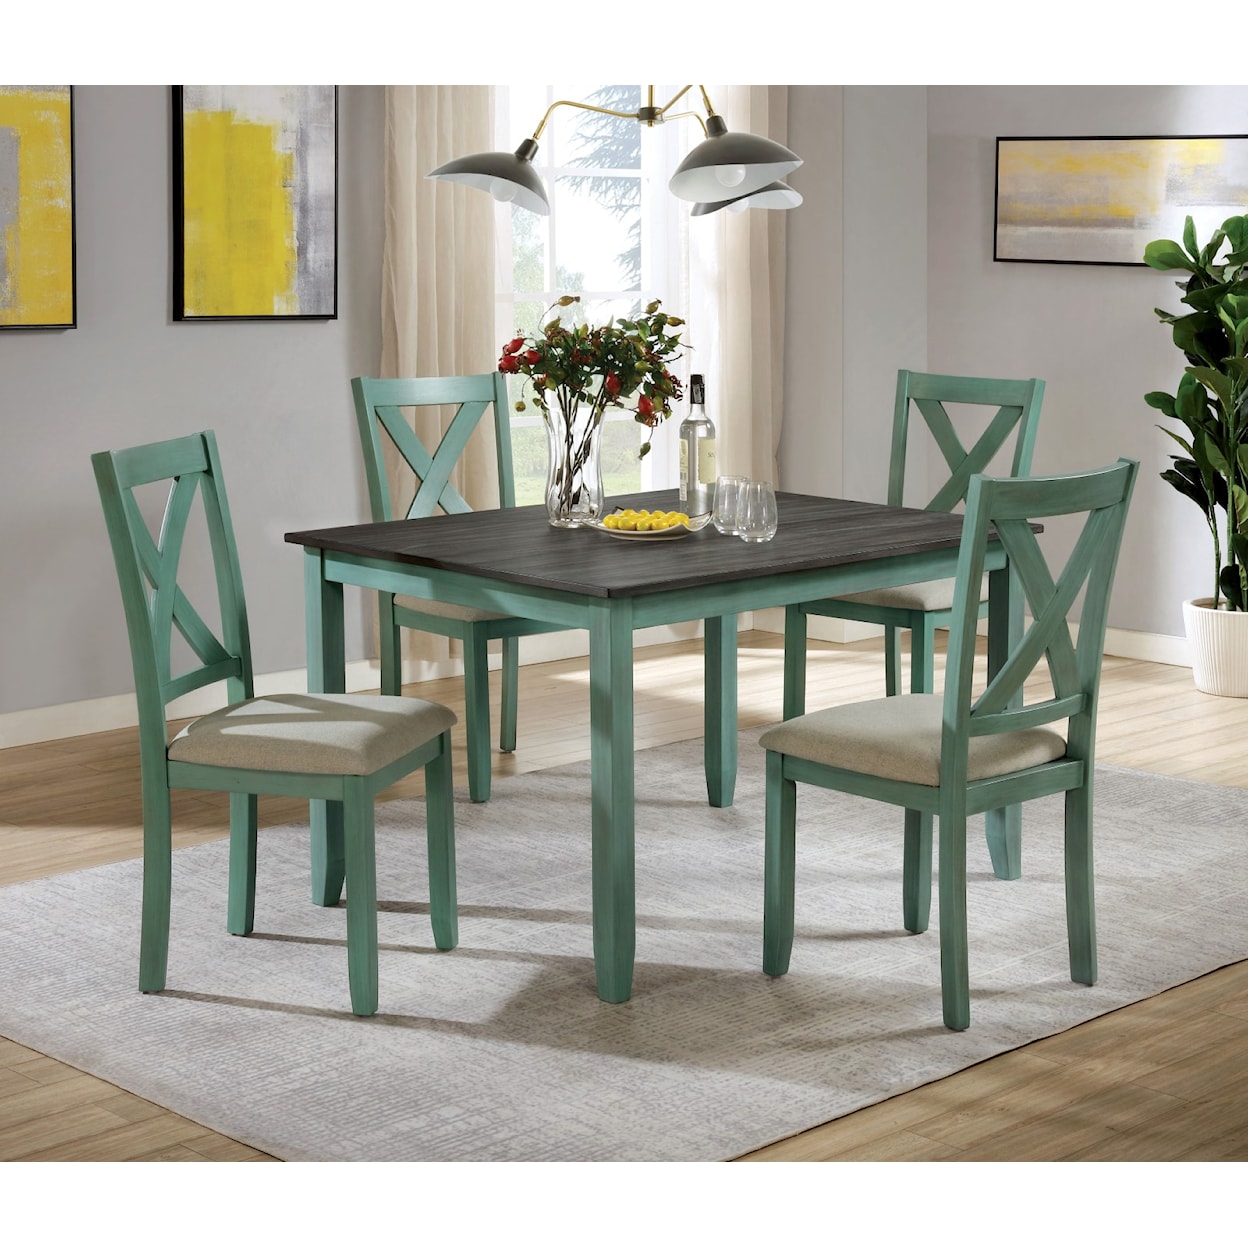 Furniture of America Anya 5-Piece Dining Table Set